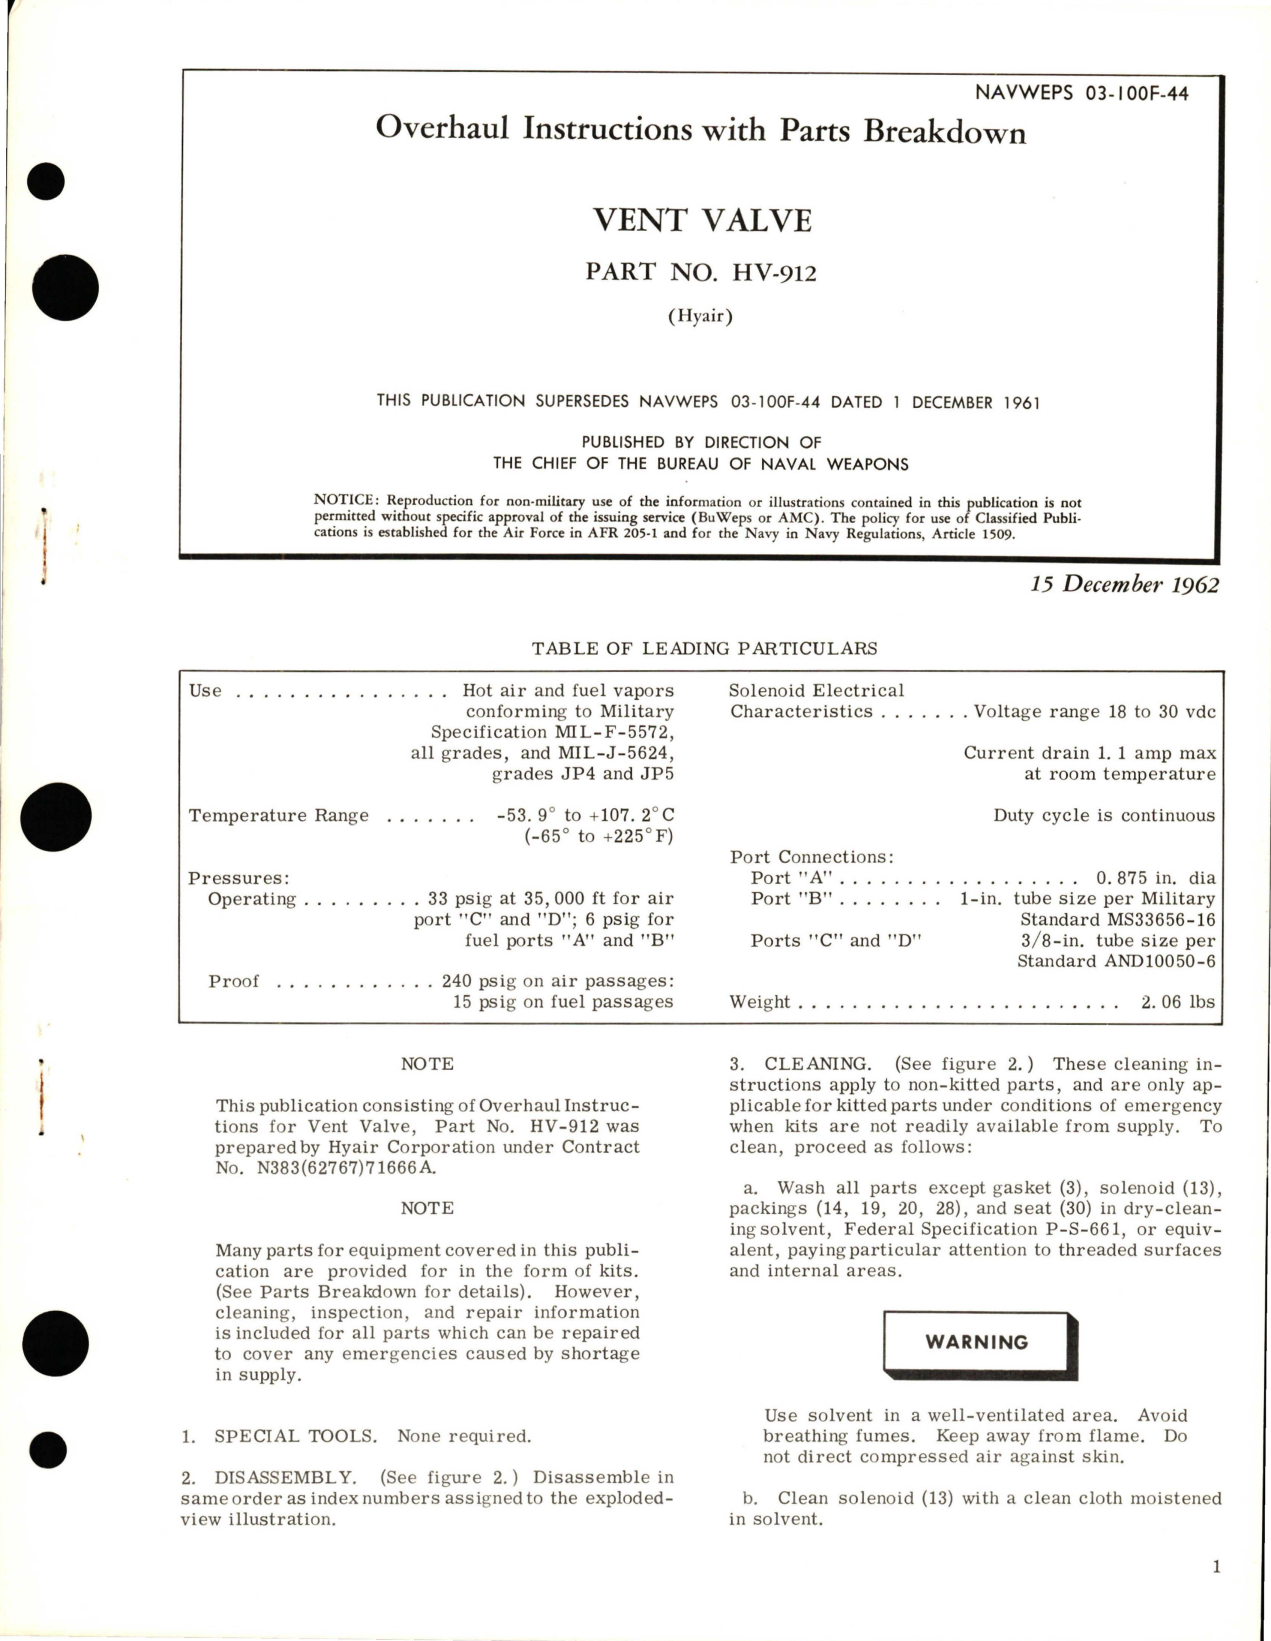 Sample page 1 from AirCorps Library document: Overhaul Instructions with Parts Breakdown for Vent Valve - Part HV-912